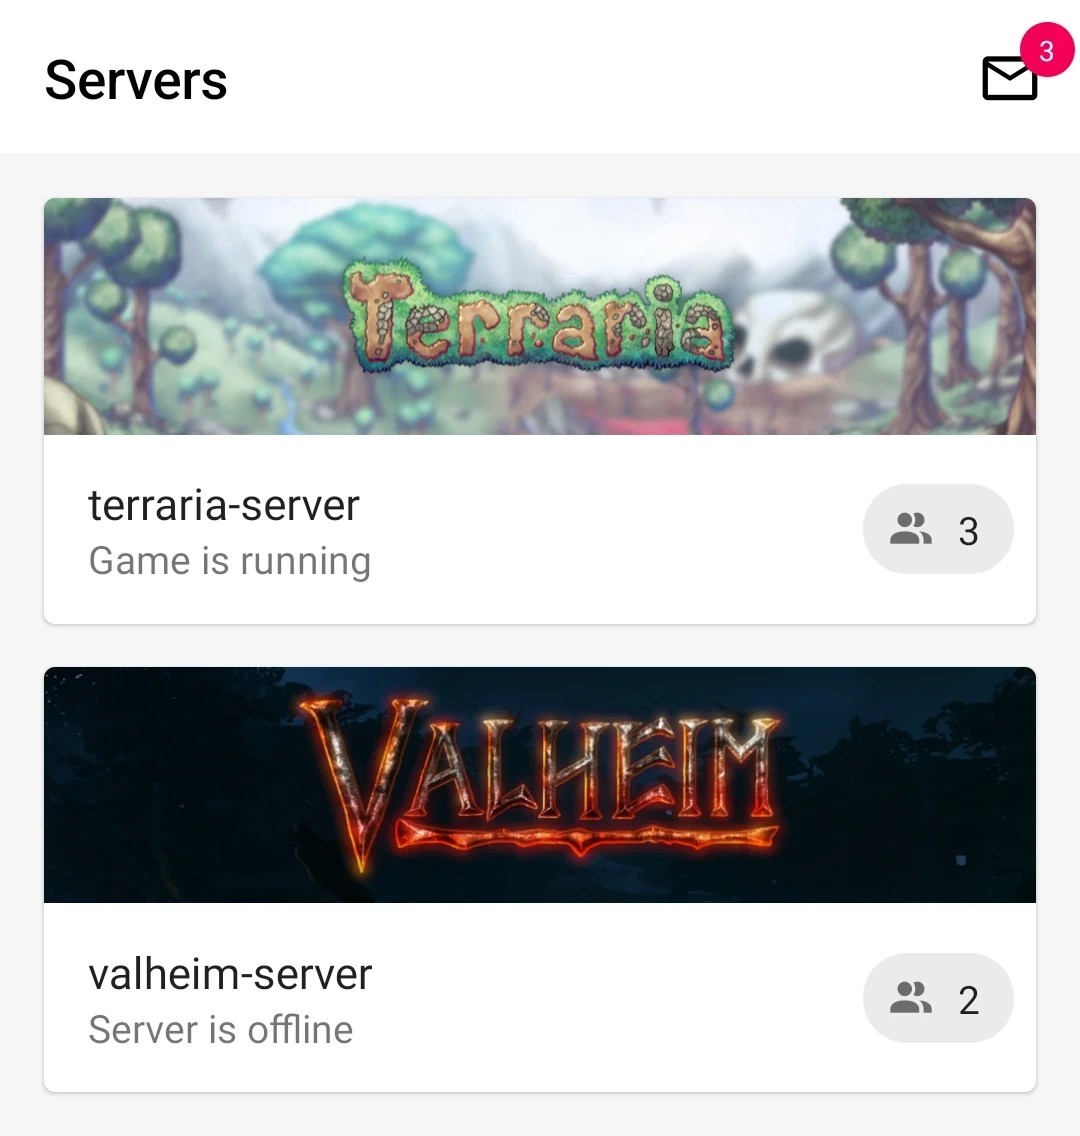 A list of the users servers